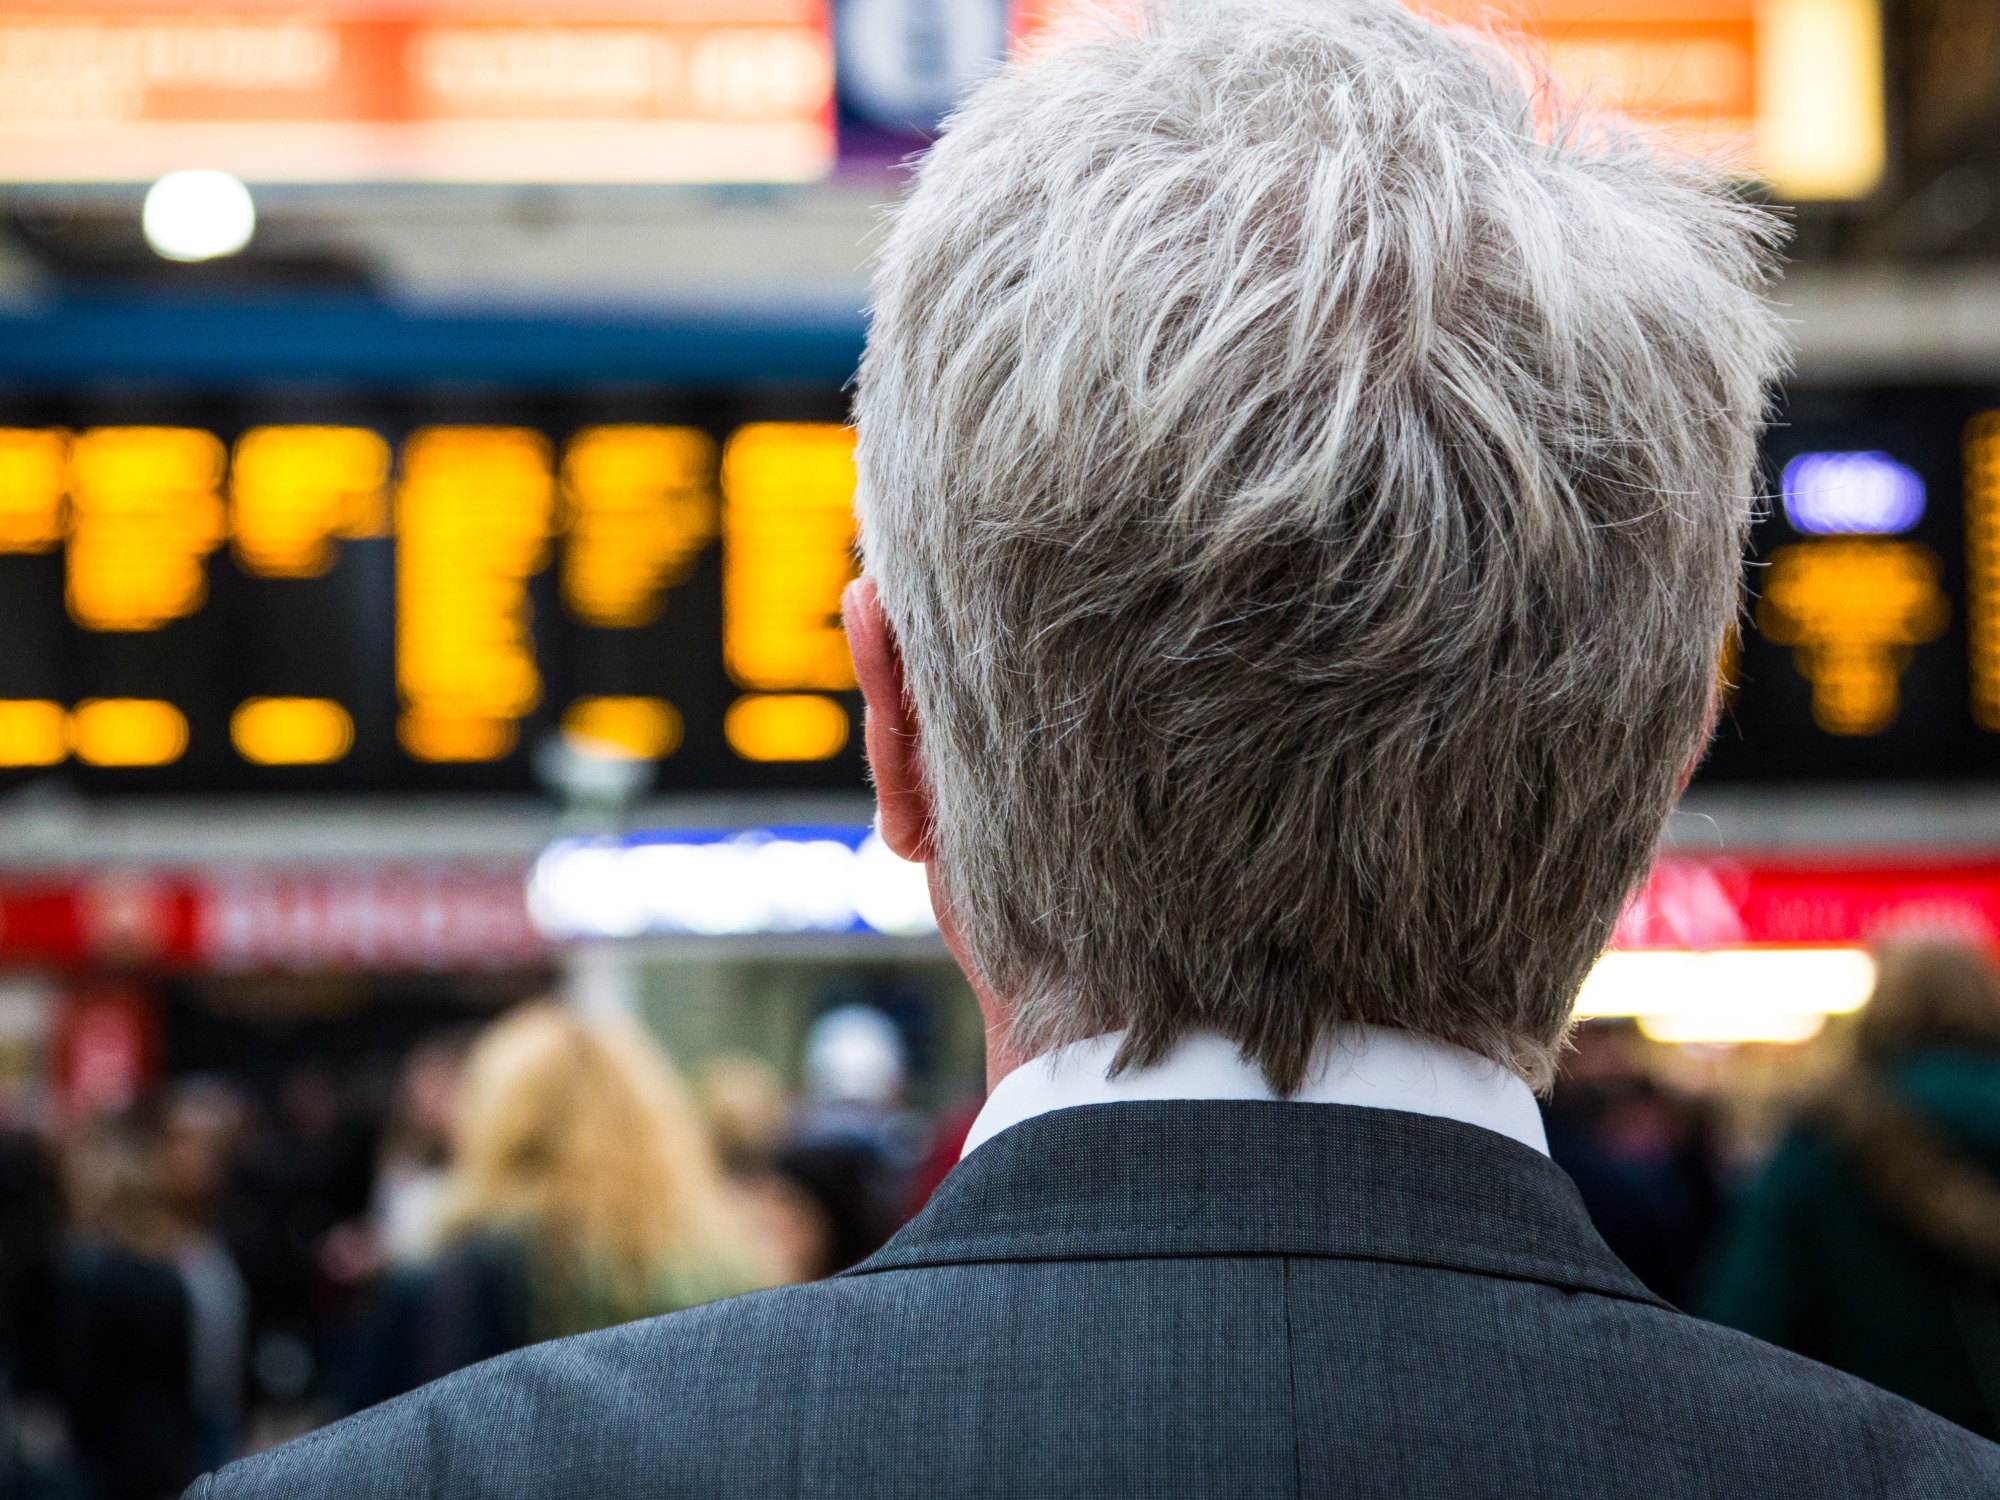 Senior businessman waiting for train with departure boards in background, London, UK